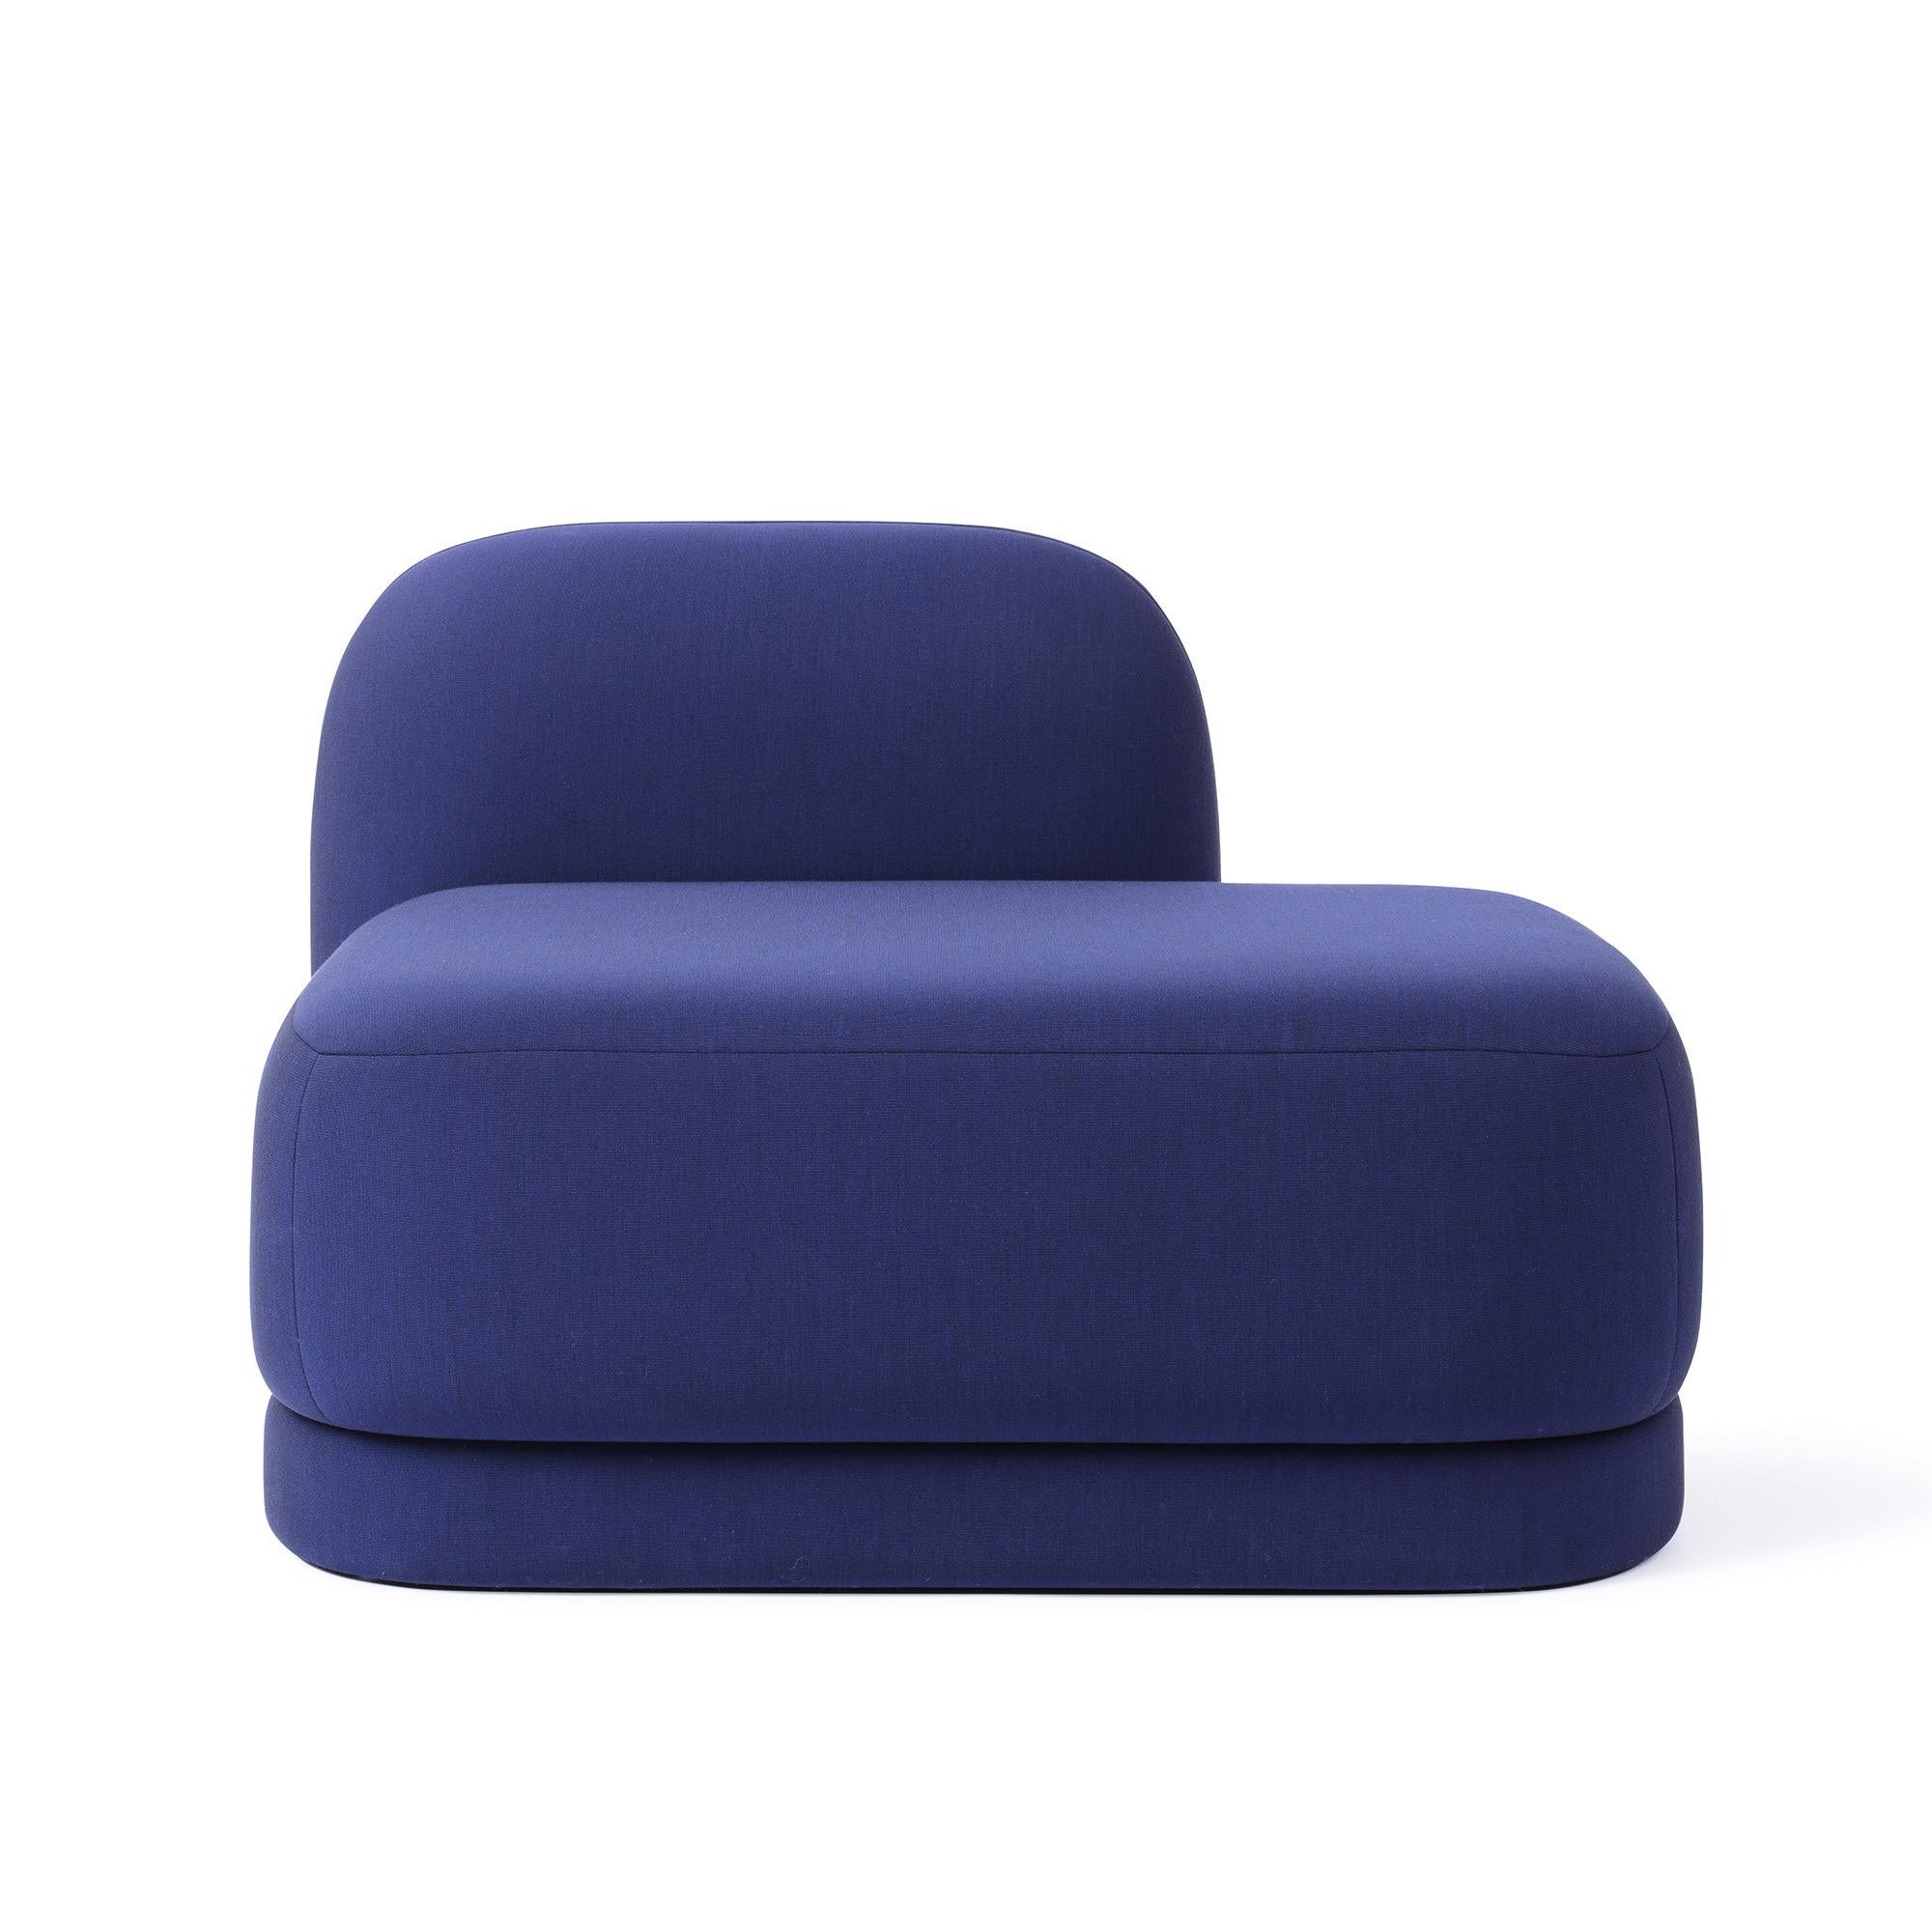 Major Tom Chaise lounge designed by Thomas Dariel
Dimensions: D 87 x W 112 x H 76 cm
Materials: Structure in solid timber and plywood. Memory foam Base and seating fully upholstered in fabric.
Available in Finishes: Kvadrat Premium Collection,